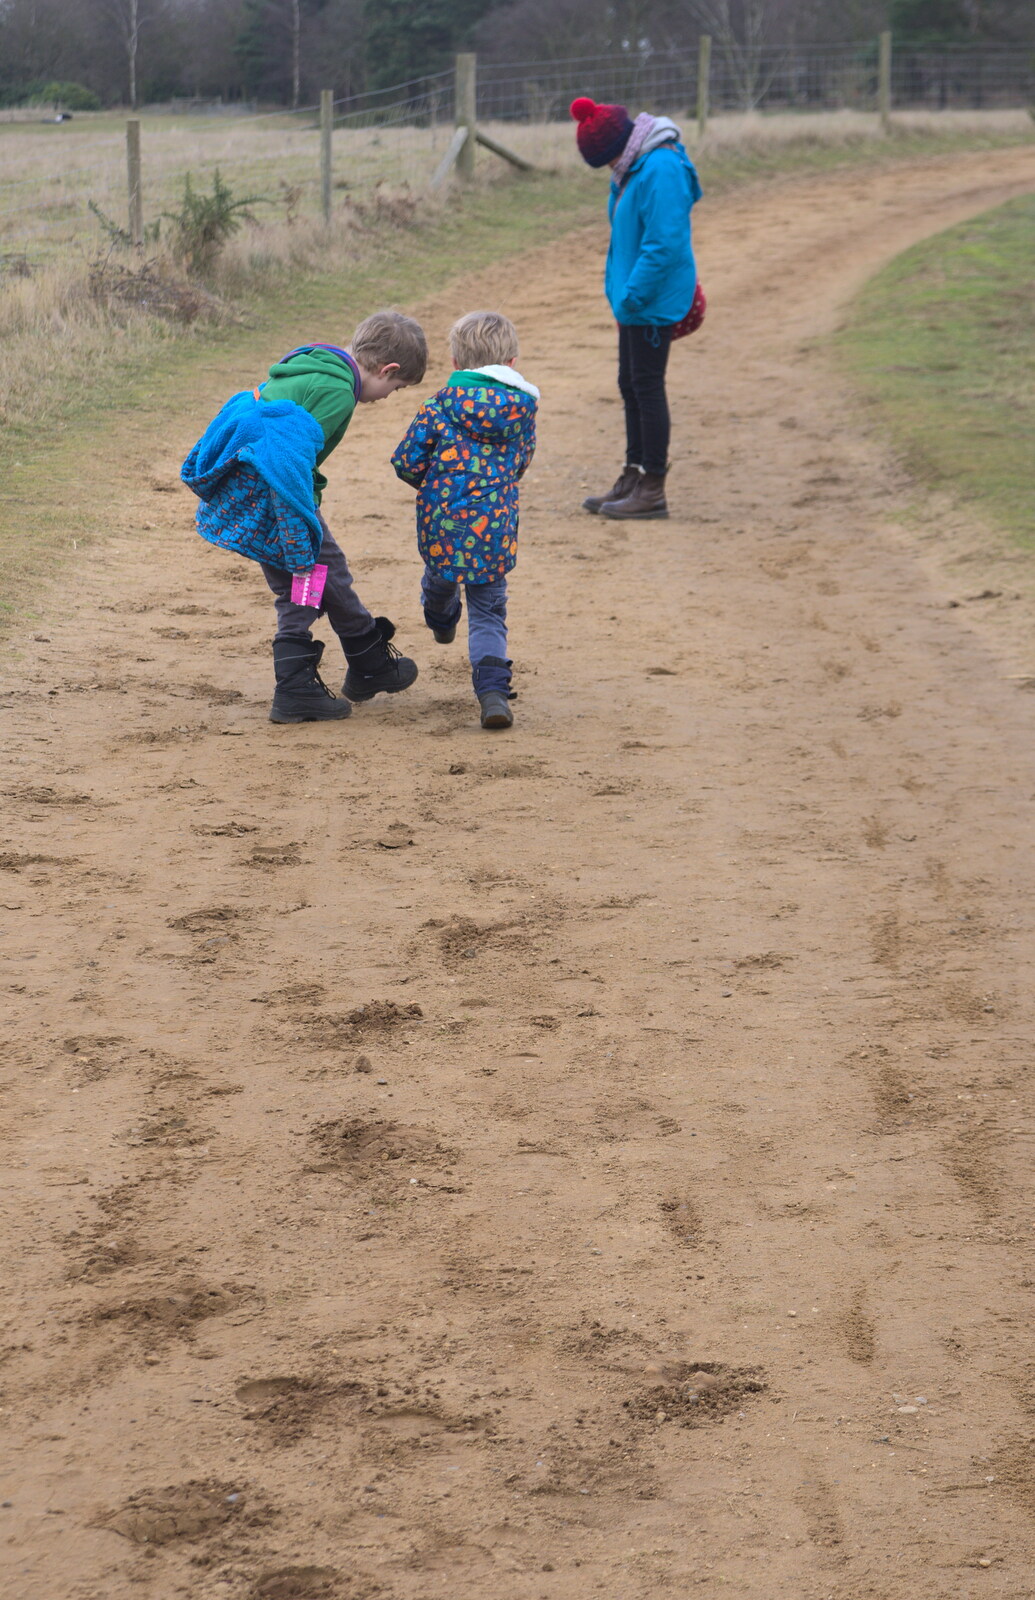 The boys enjoy making footprints in the sand from A Trip to Sutton Hoo, Woodbridge, Suffolk - 29th January 2017